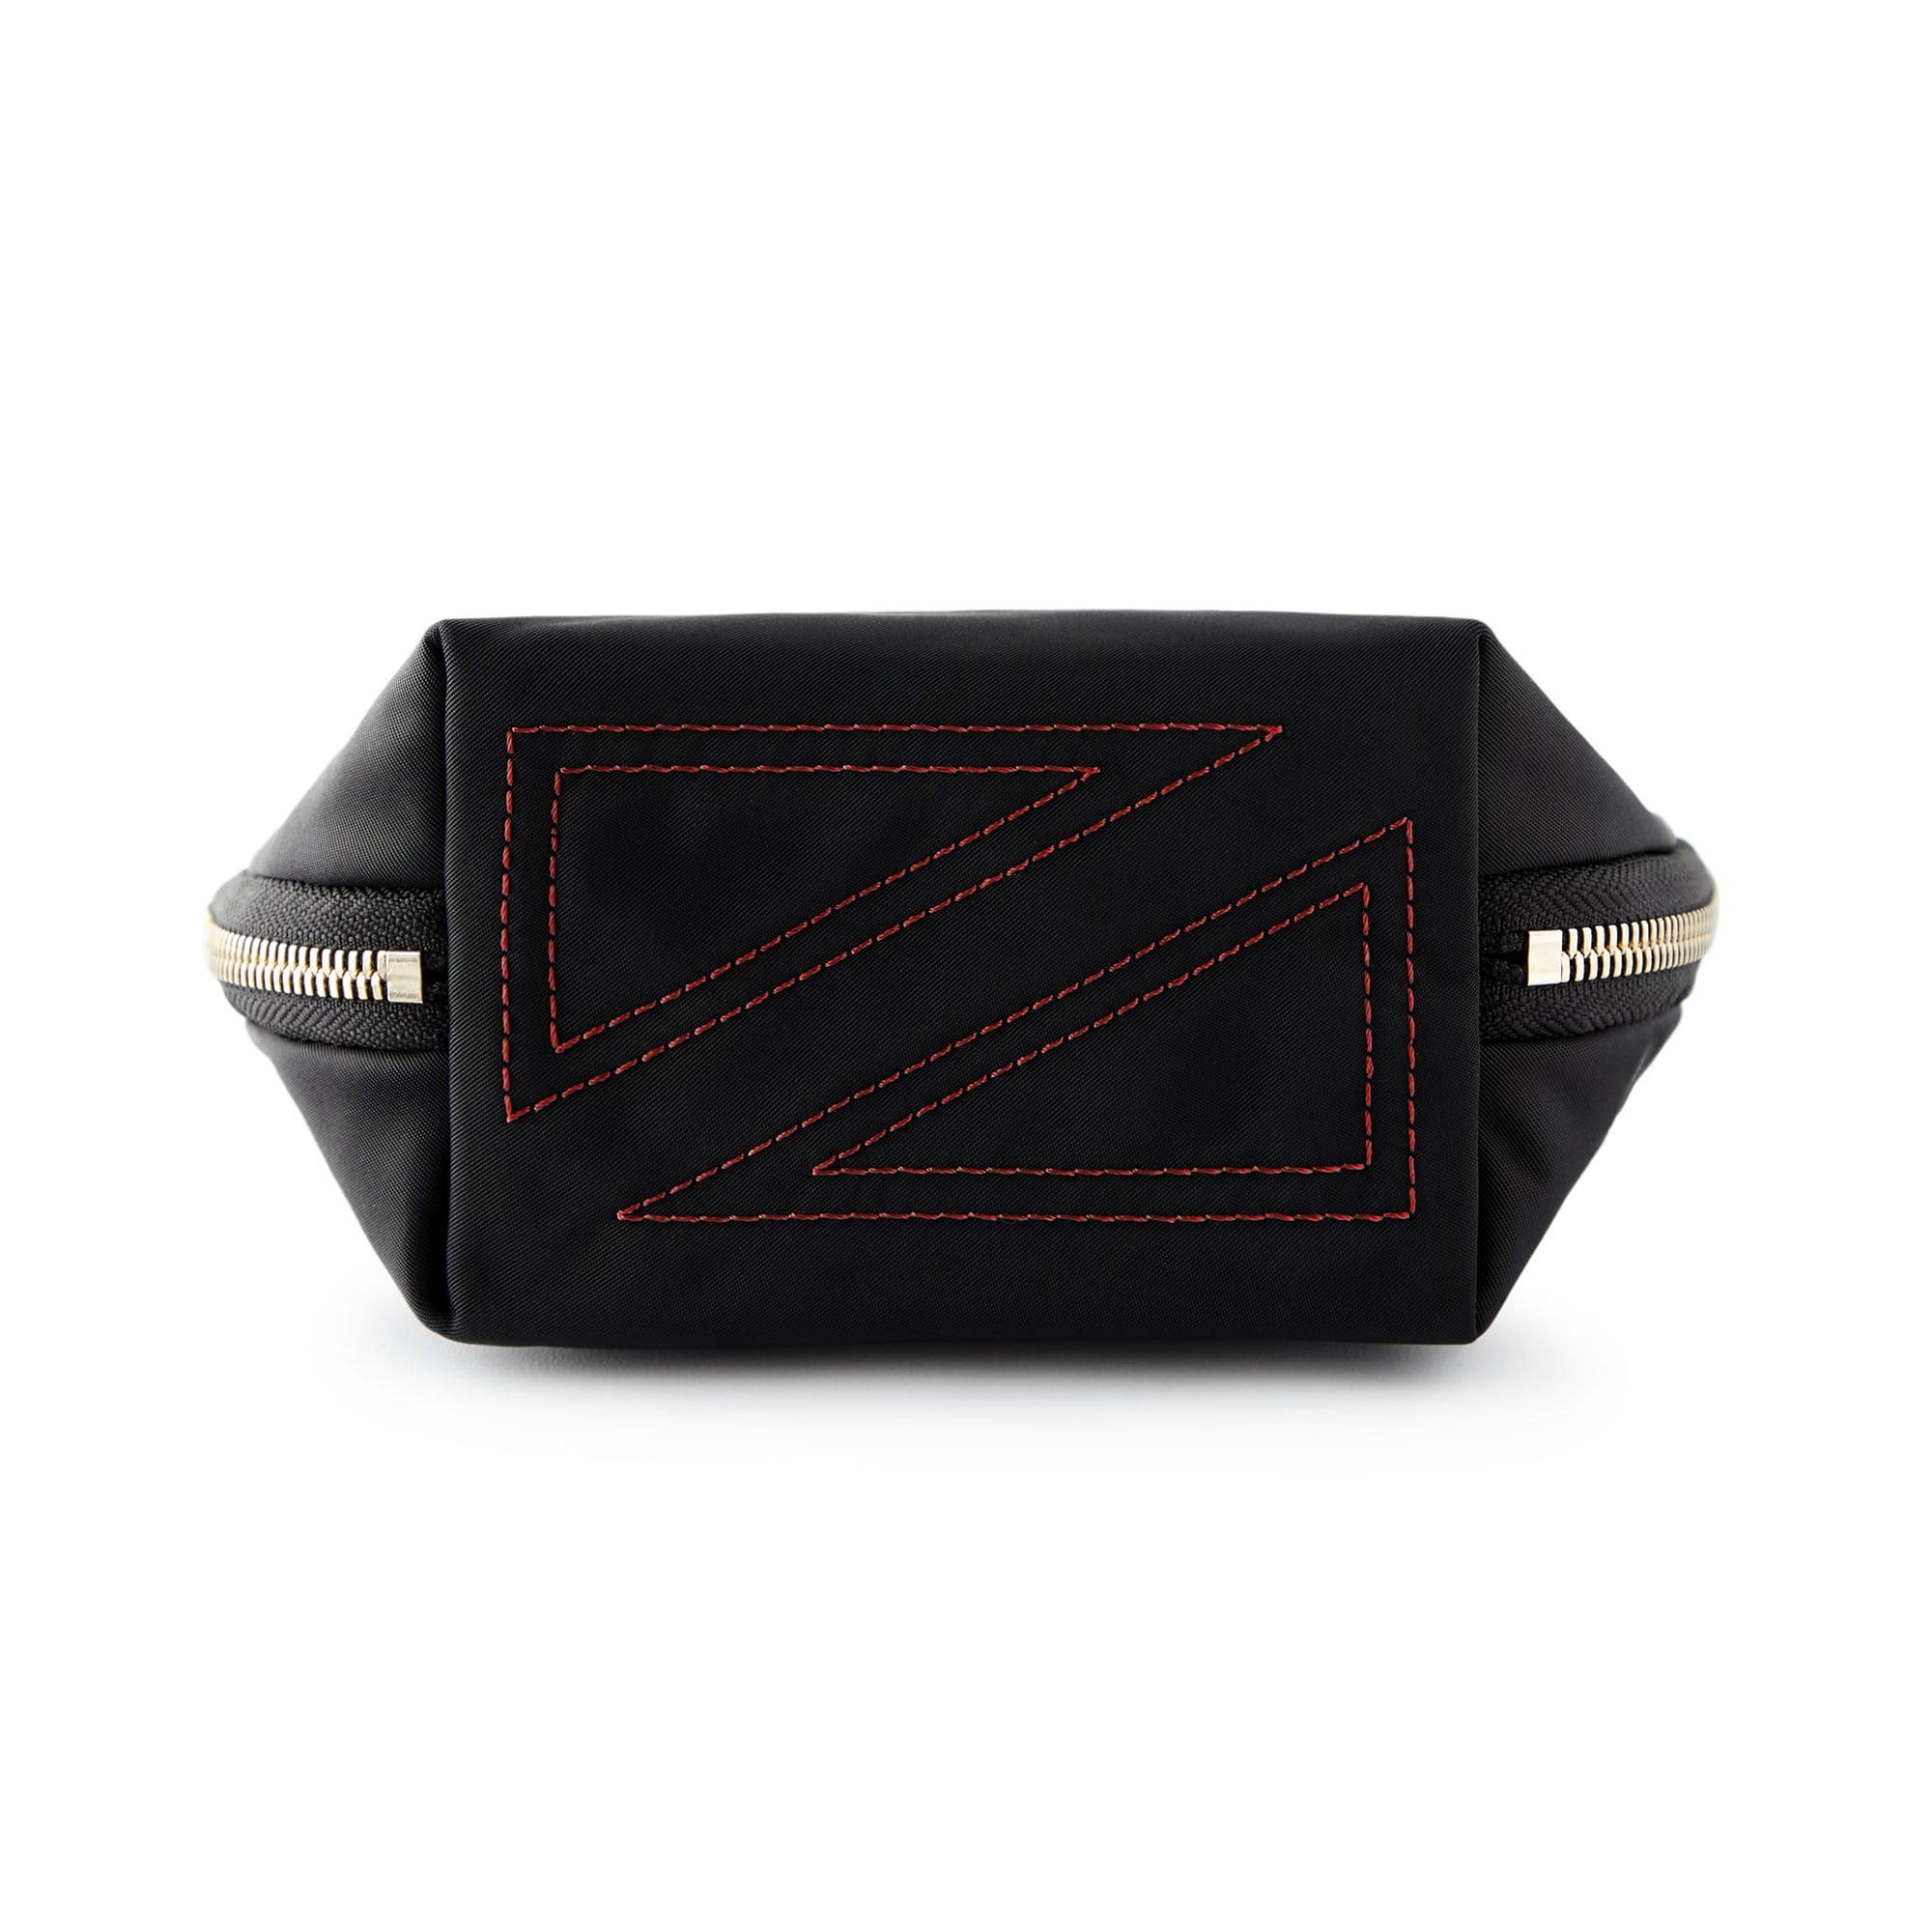 color: Satin Black Fabric with Red Interior; alt: Everyday Small Size Makeup Bag | KUSSHI